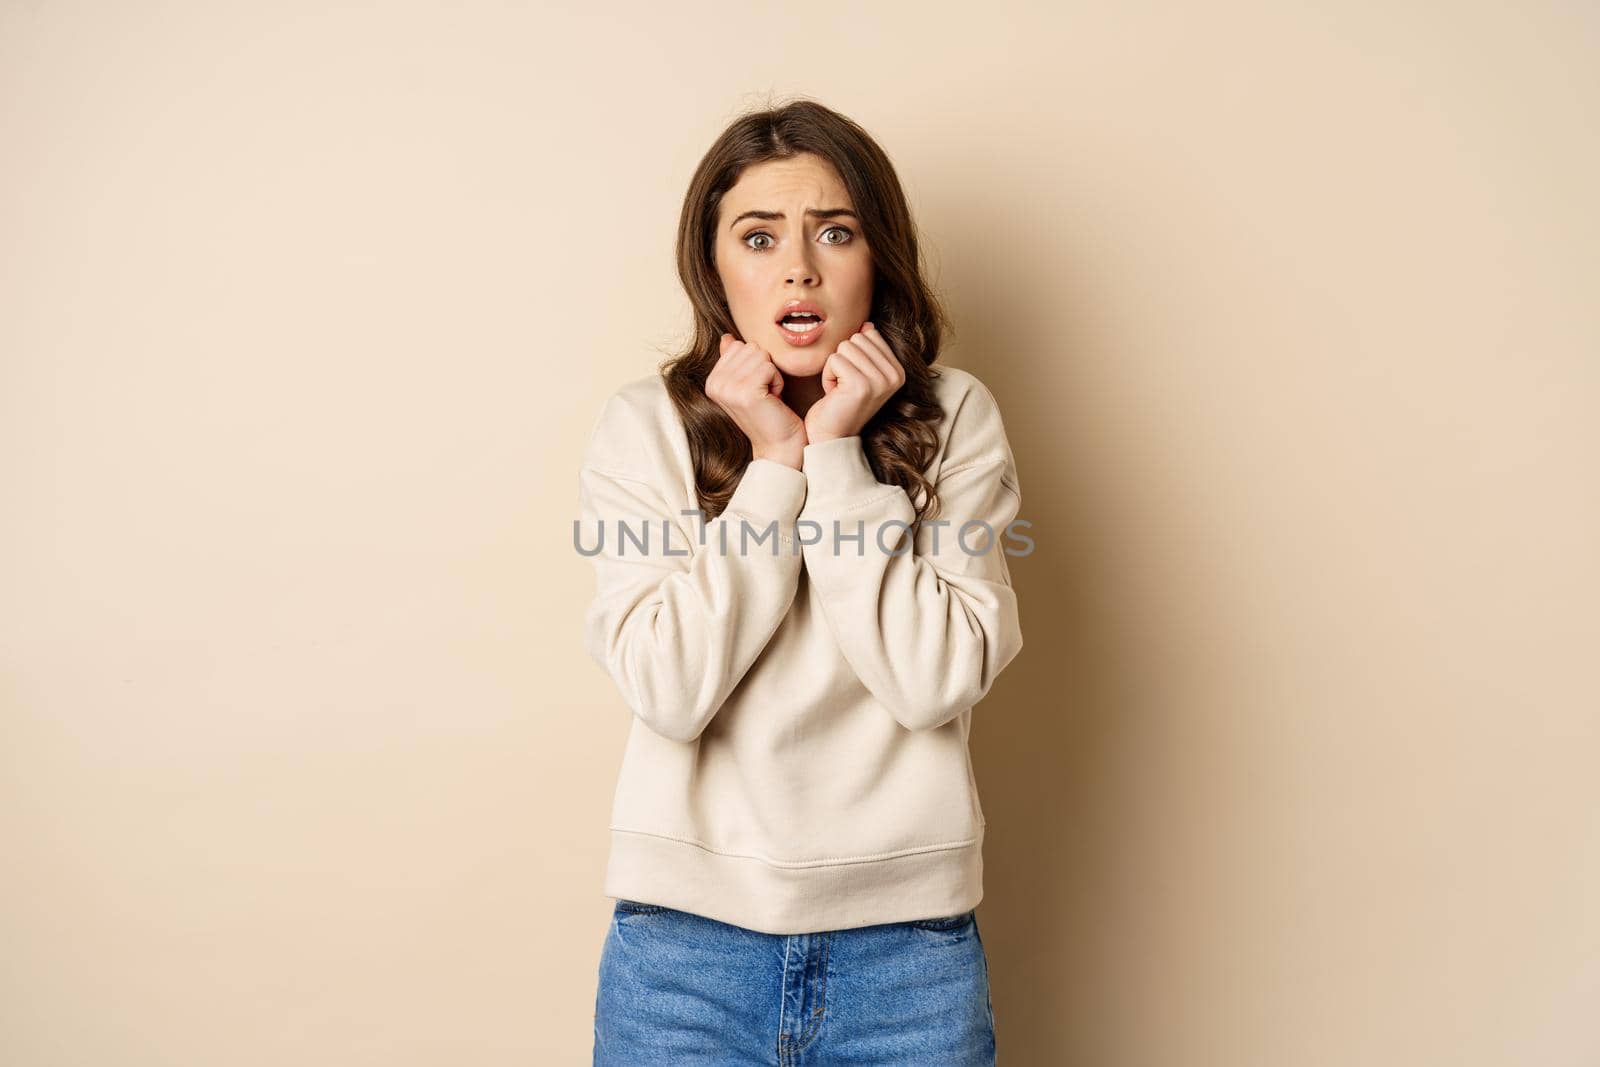 Scared insecure woman trembling from fear, looking at camera shocked and frightened, standing over beige background.